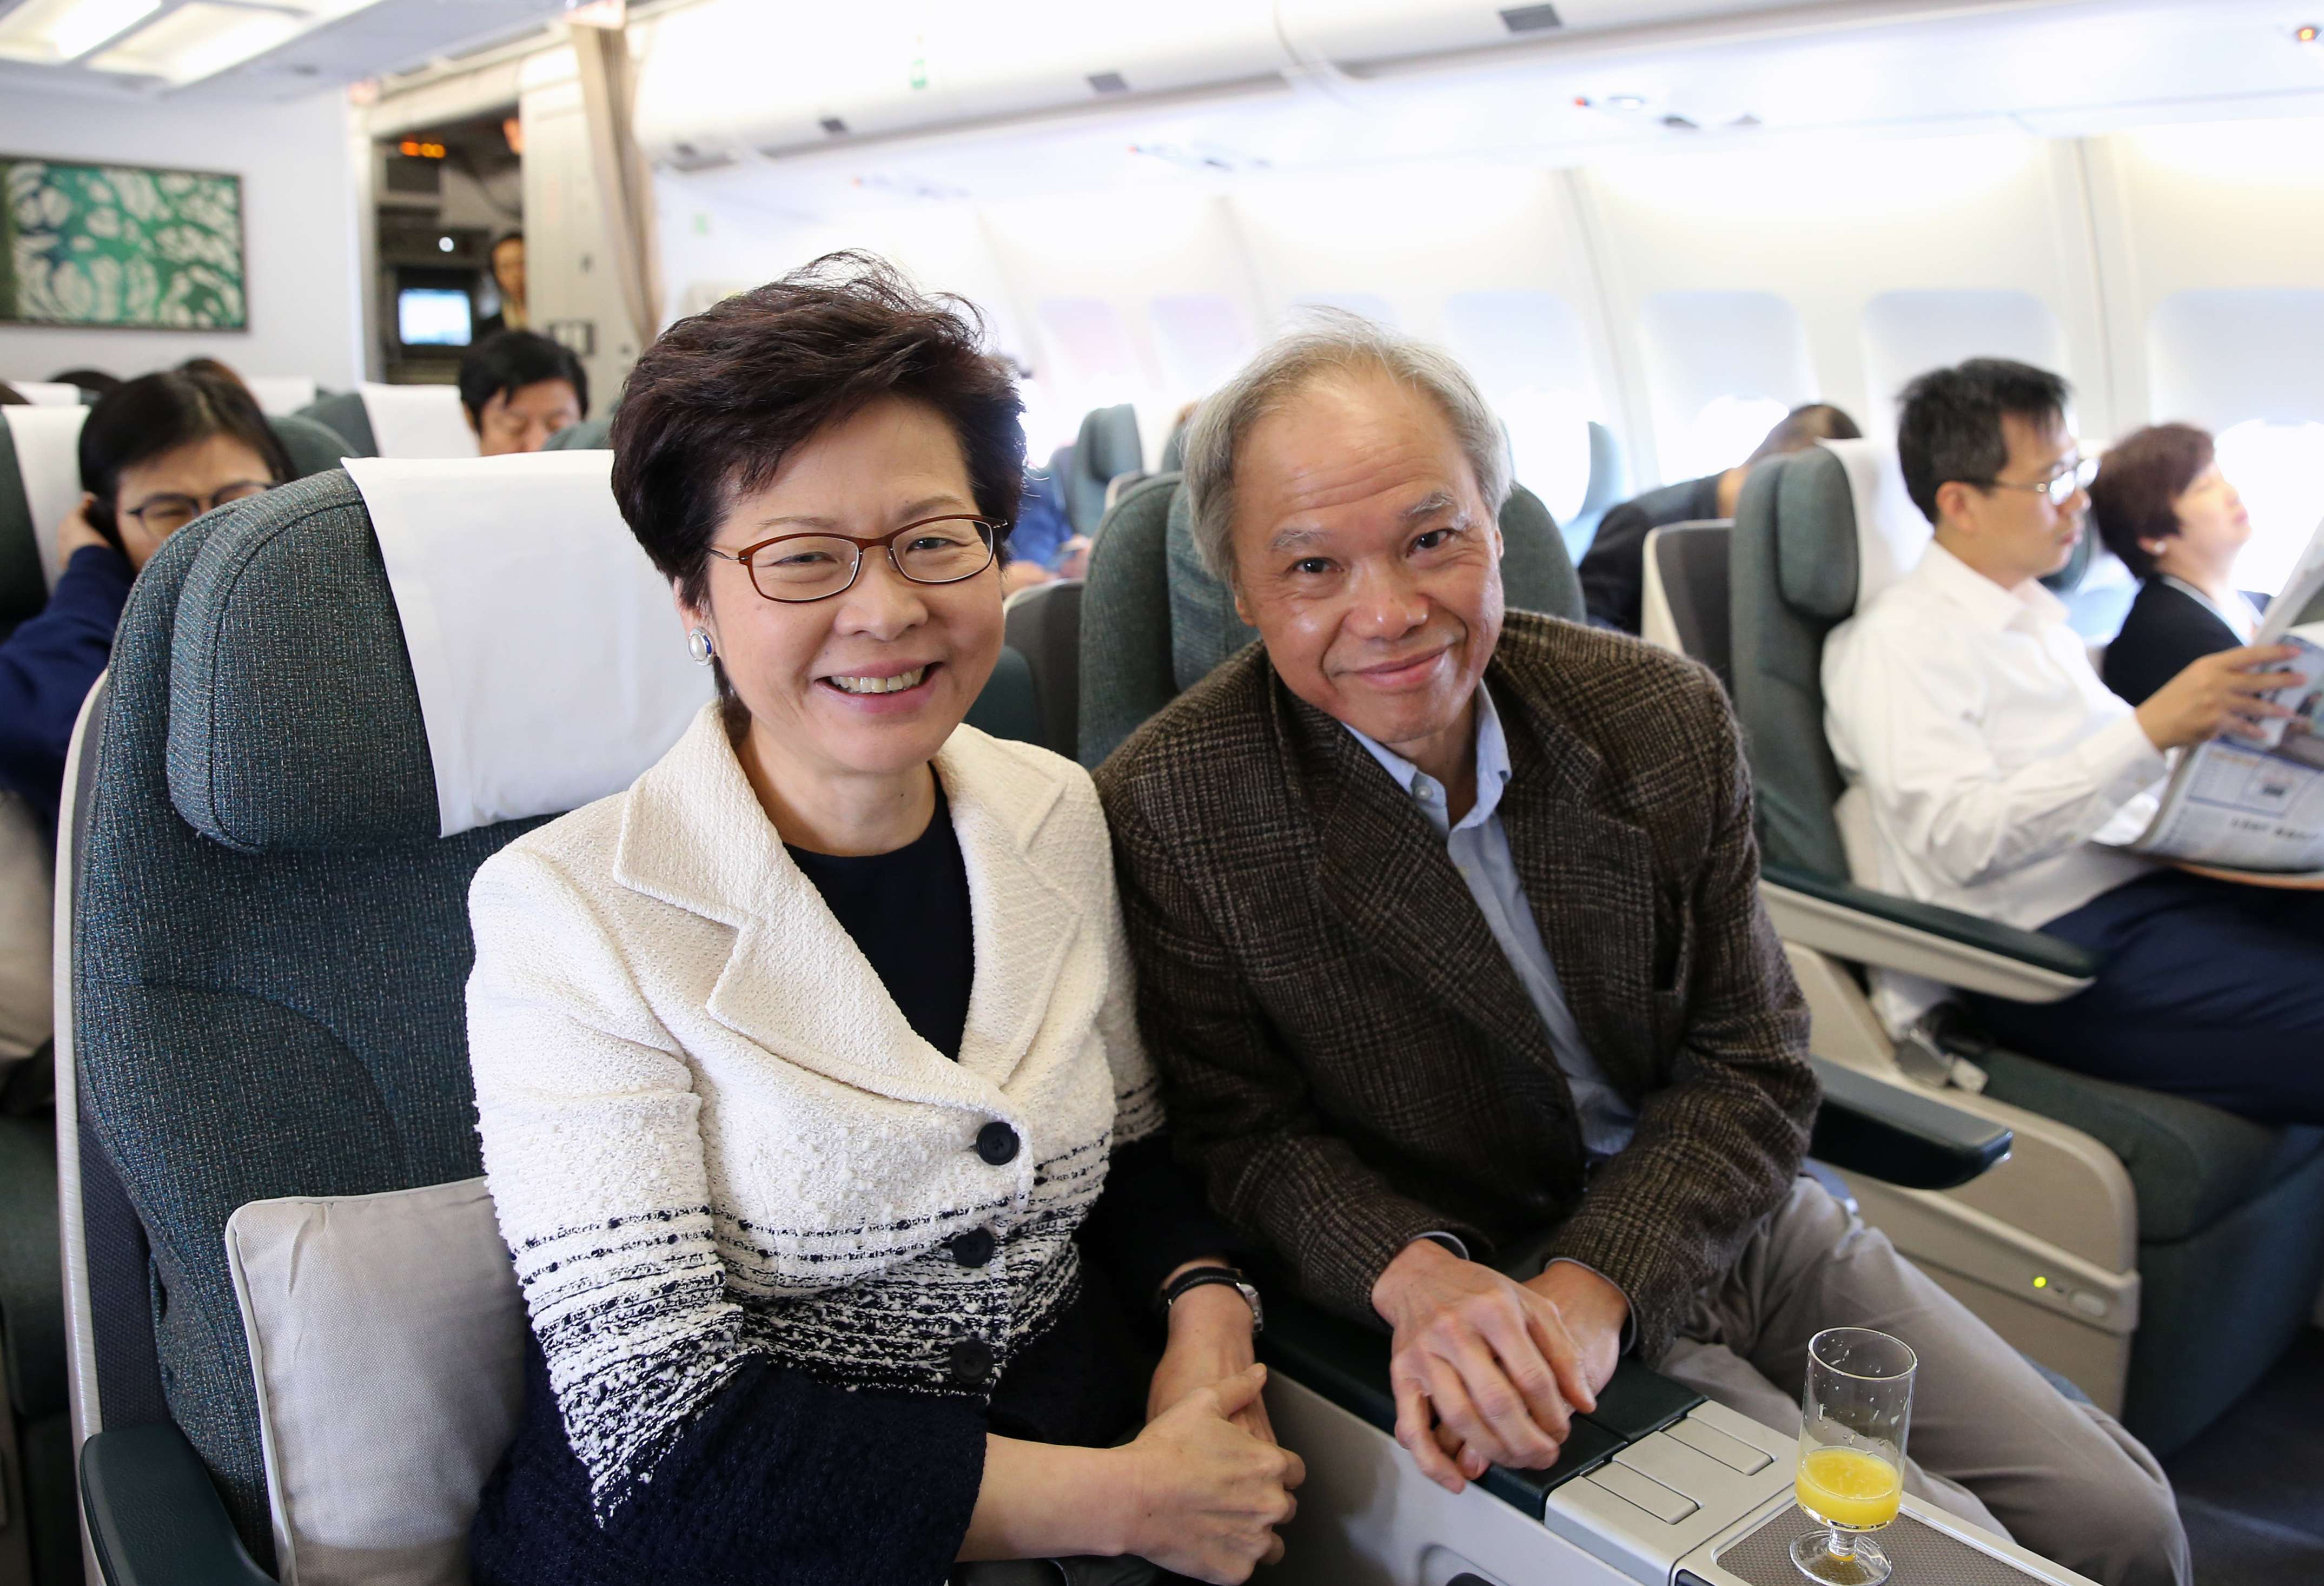 Carrie Lam Cheng Yuet-ngor is travelling to Beijing with her mathematician husband, Lam Siu-por. The couple married in 1984 and have two sons. Photo: Sam Tsang